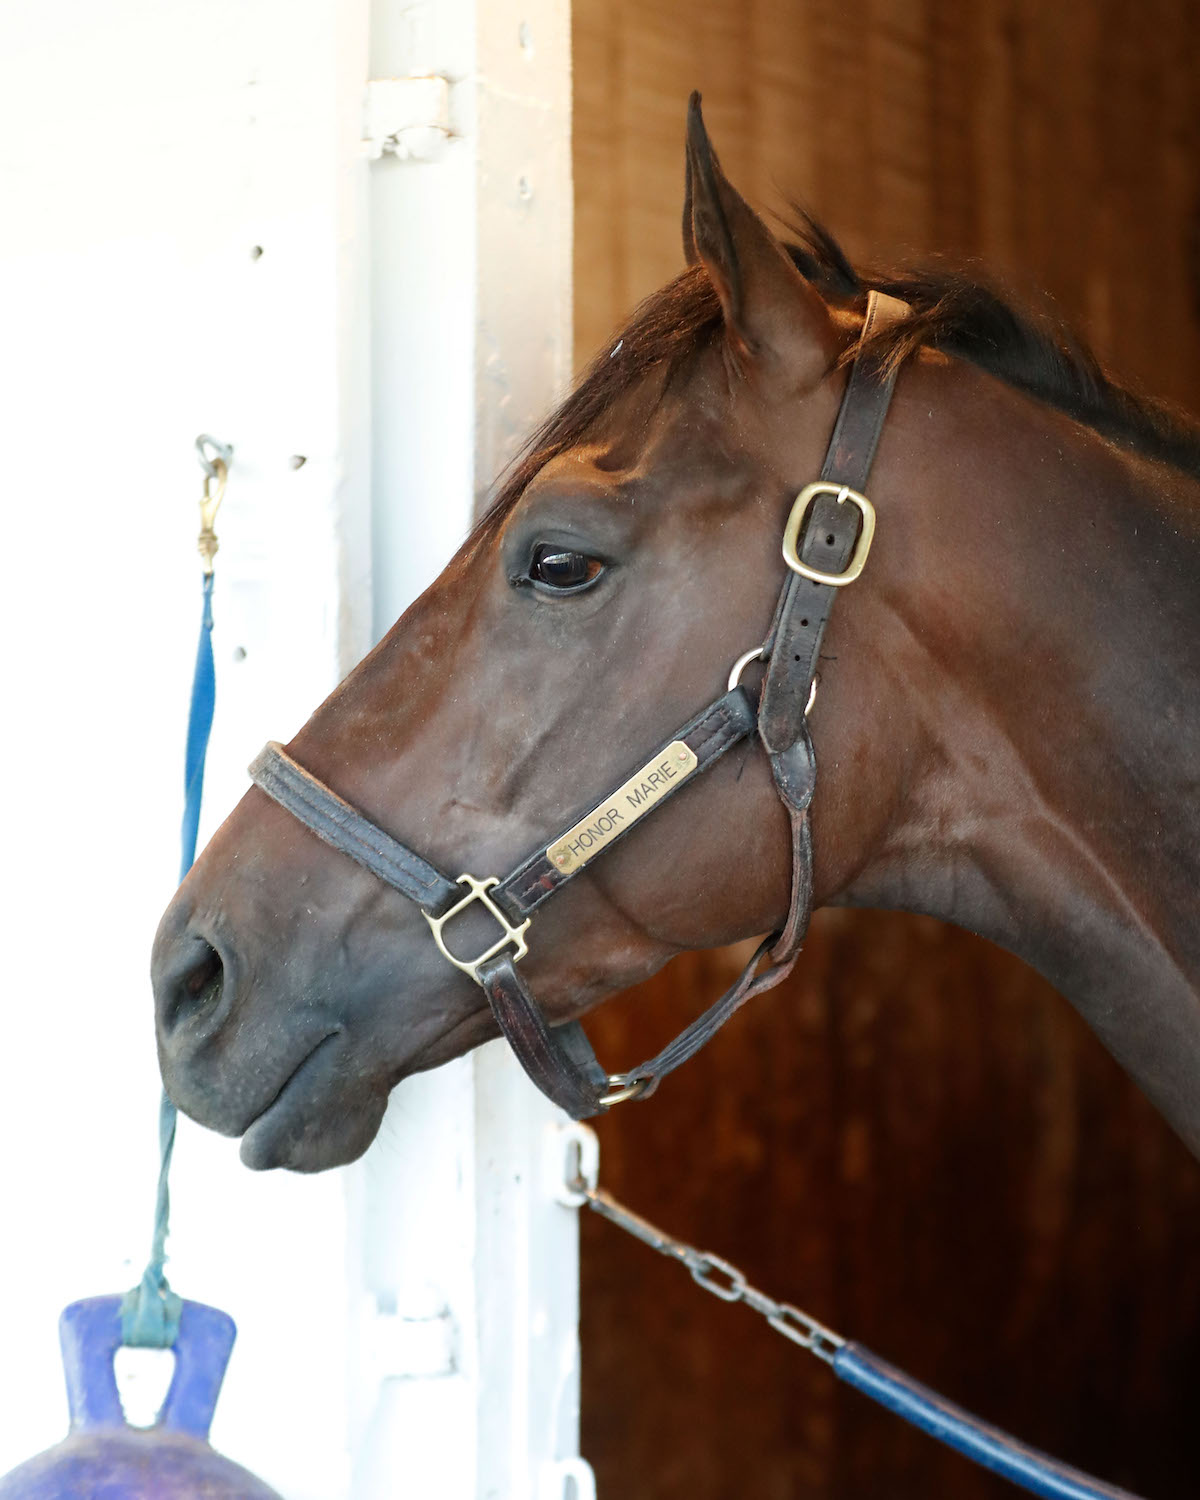 Honor Marie: ‘His experience of Churchill Downs must be a positive,’ says Whit Beckman. Photo: Churchill Downs